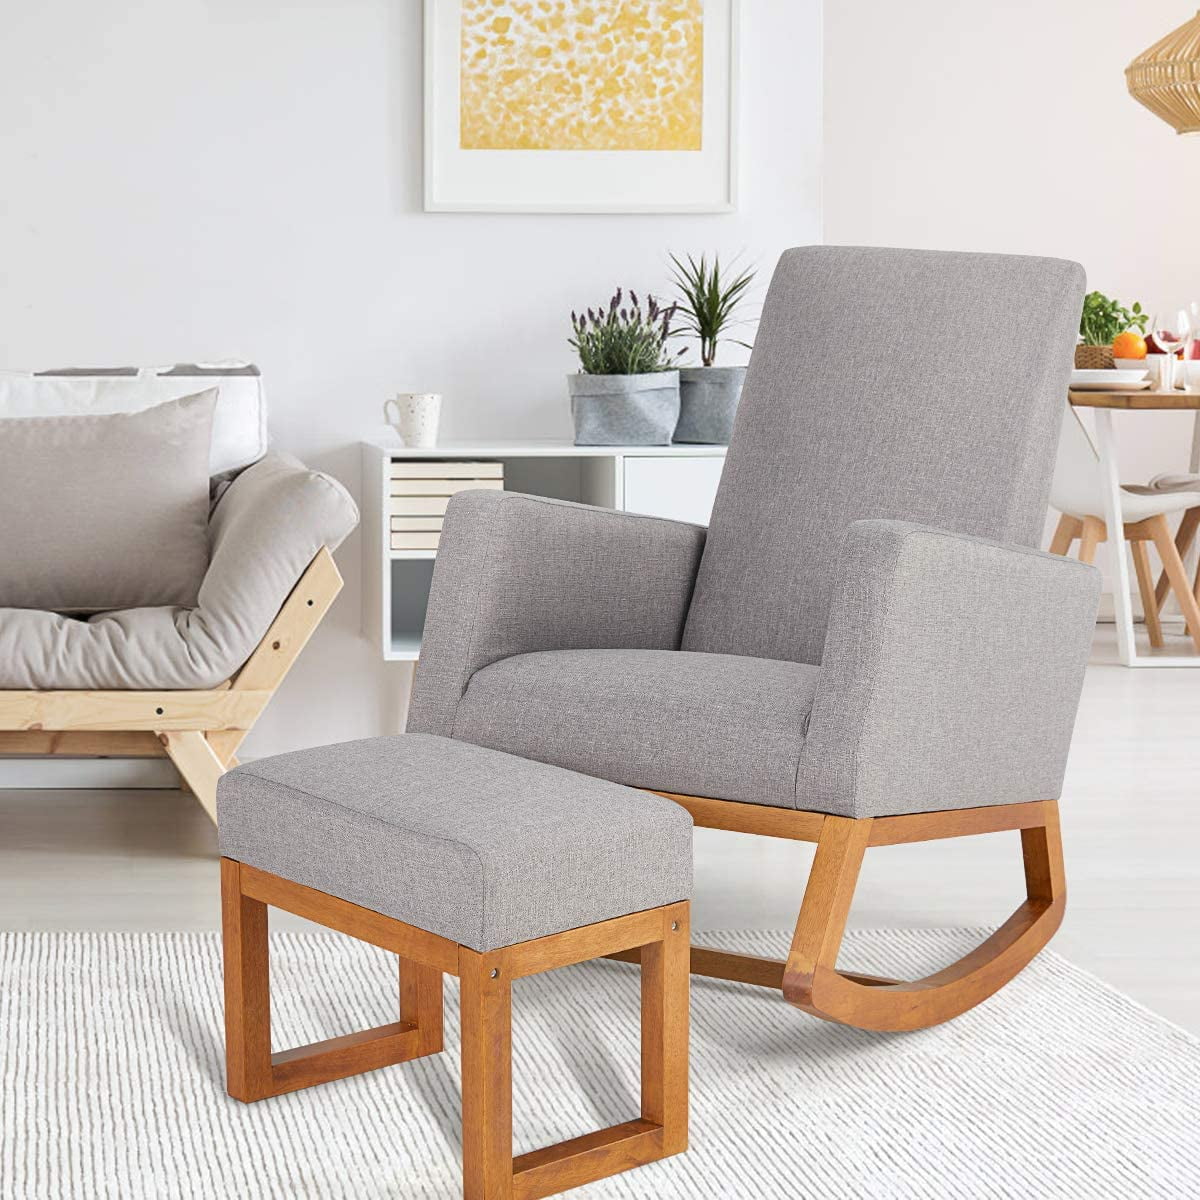 Erommy Rocking Chair,Mid Erommy Century Accent Chair